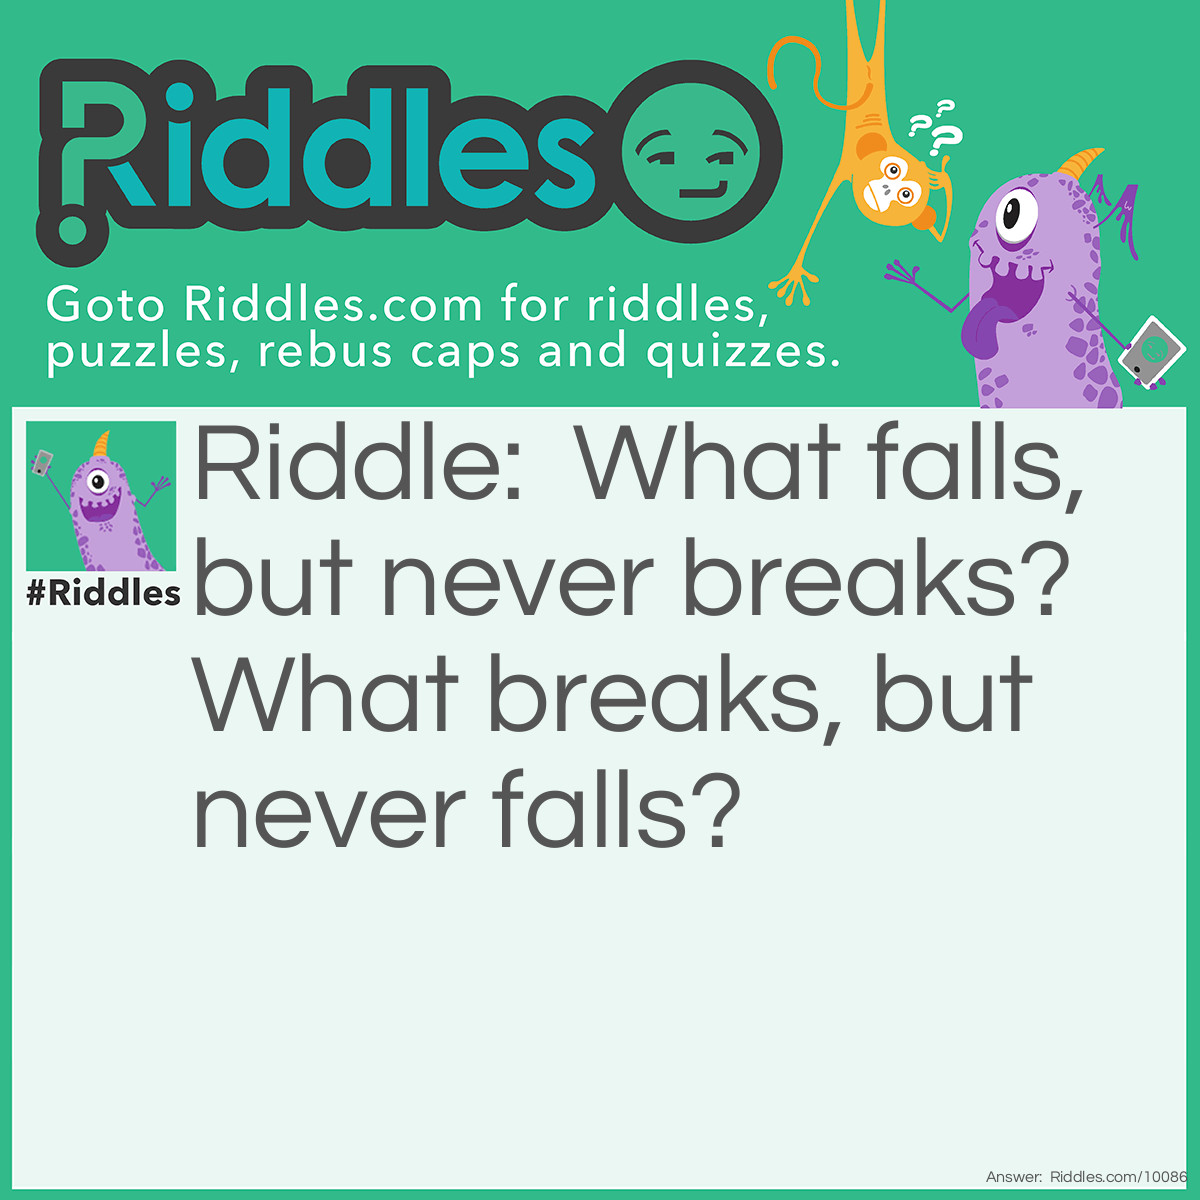 Riddle: What falls, but never breaks? What breaks, but never falls? Answer: day and night